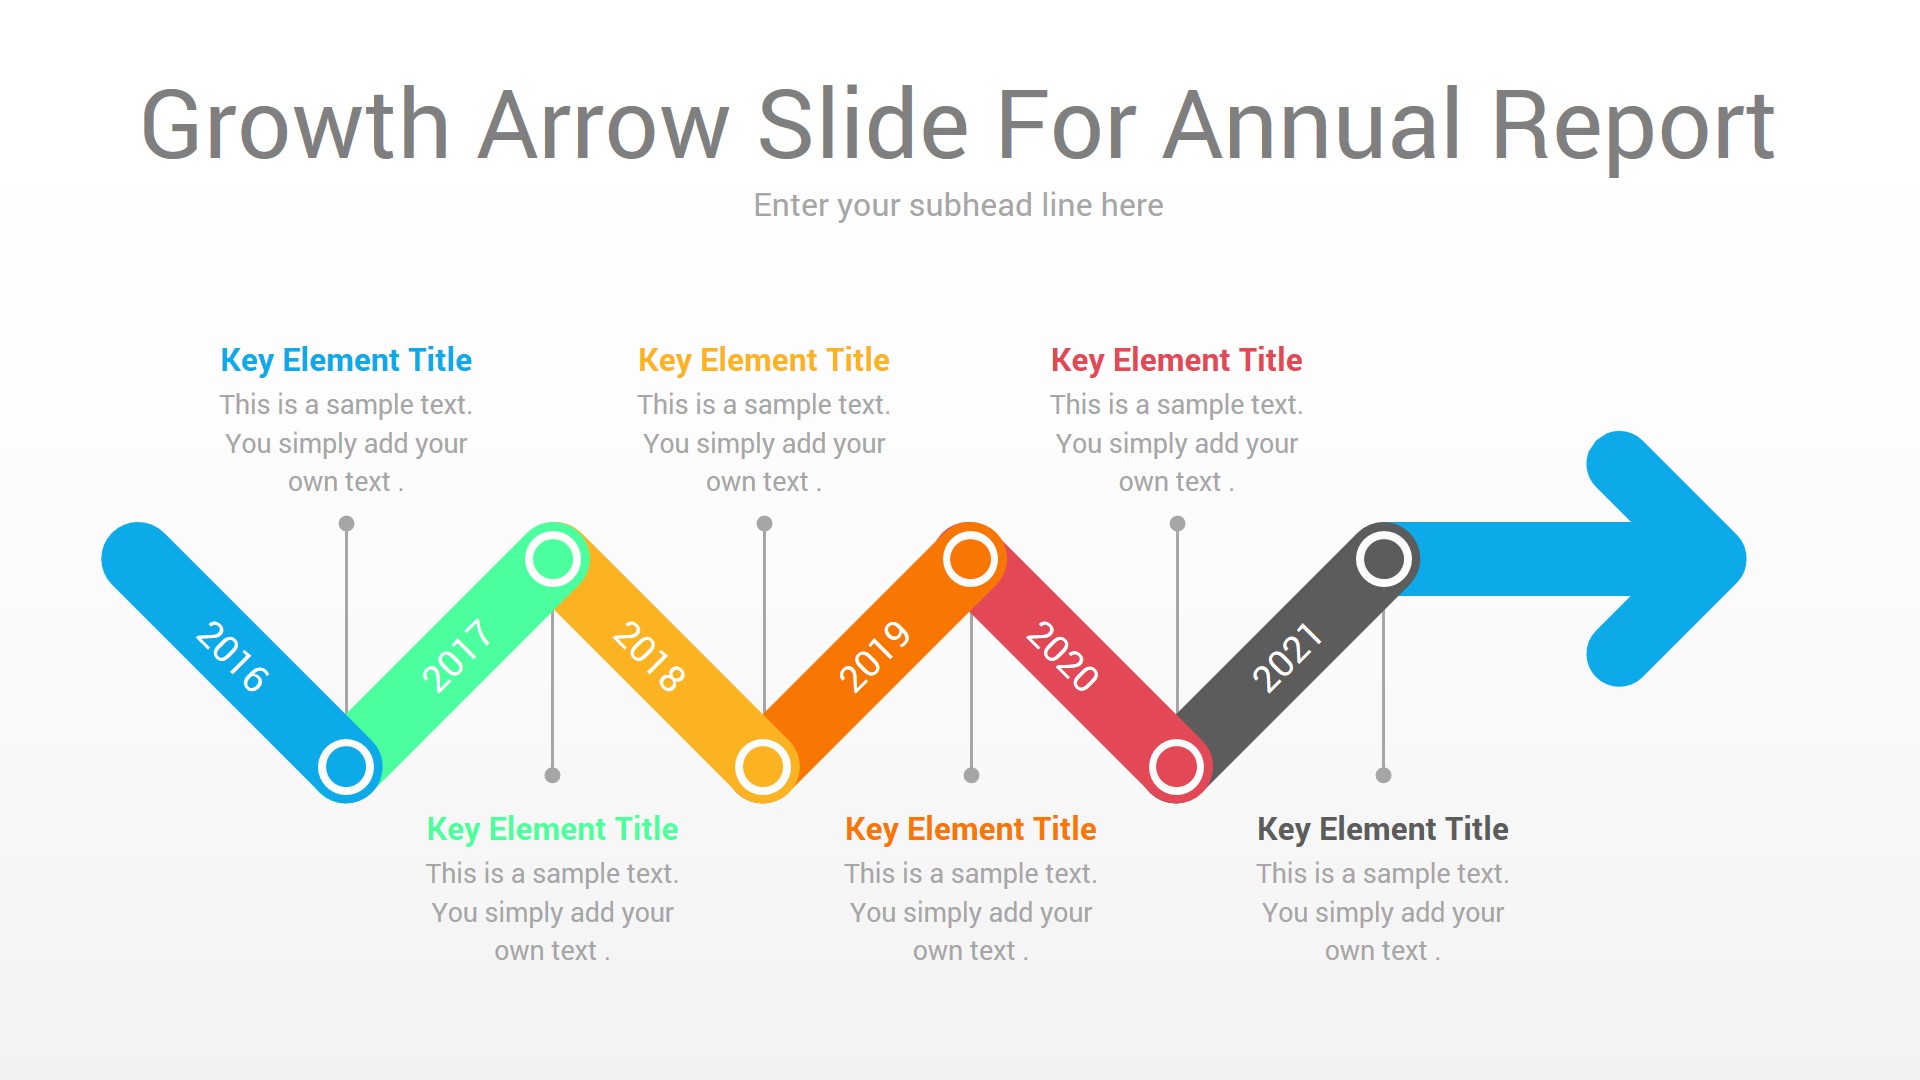 growth arrow slide for annual report